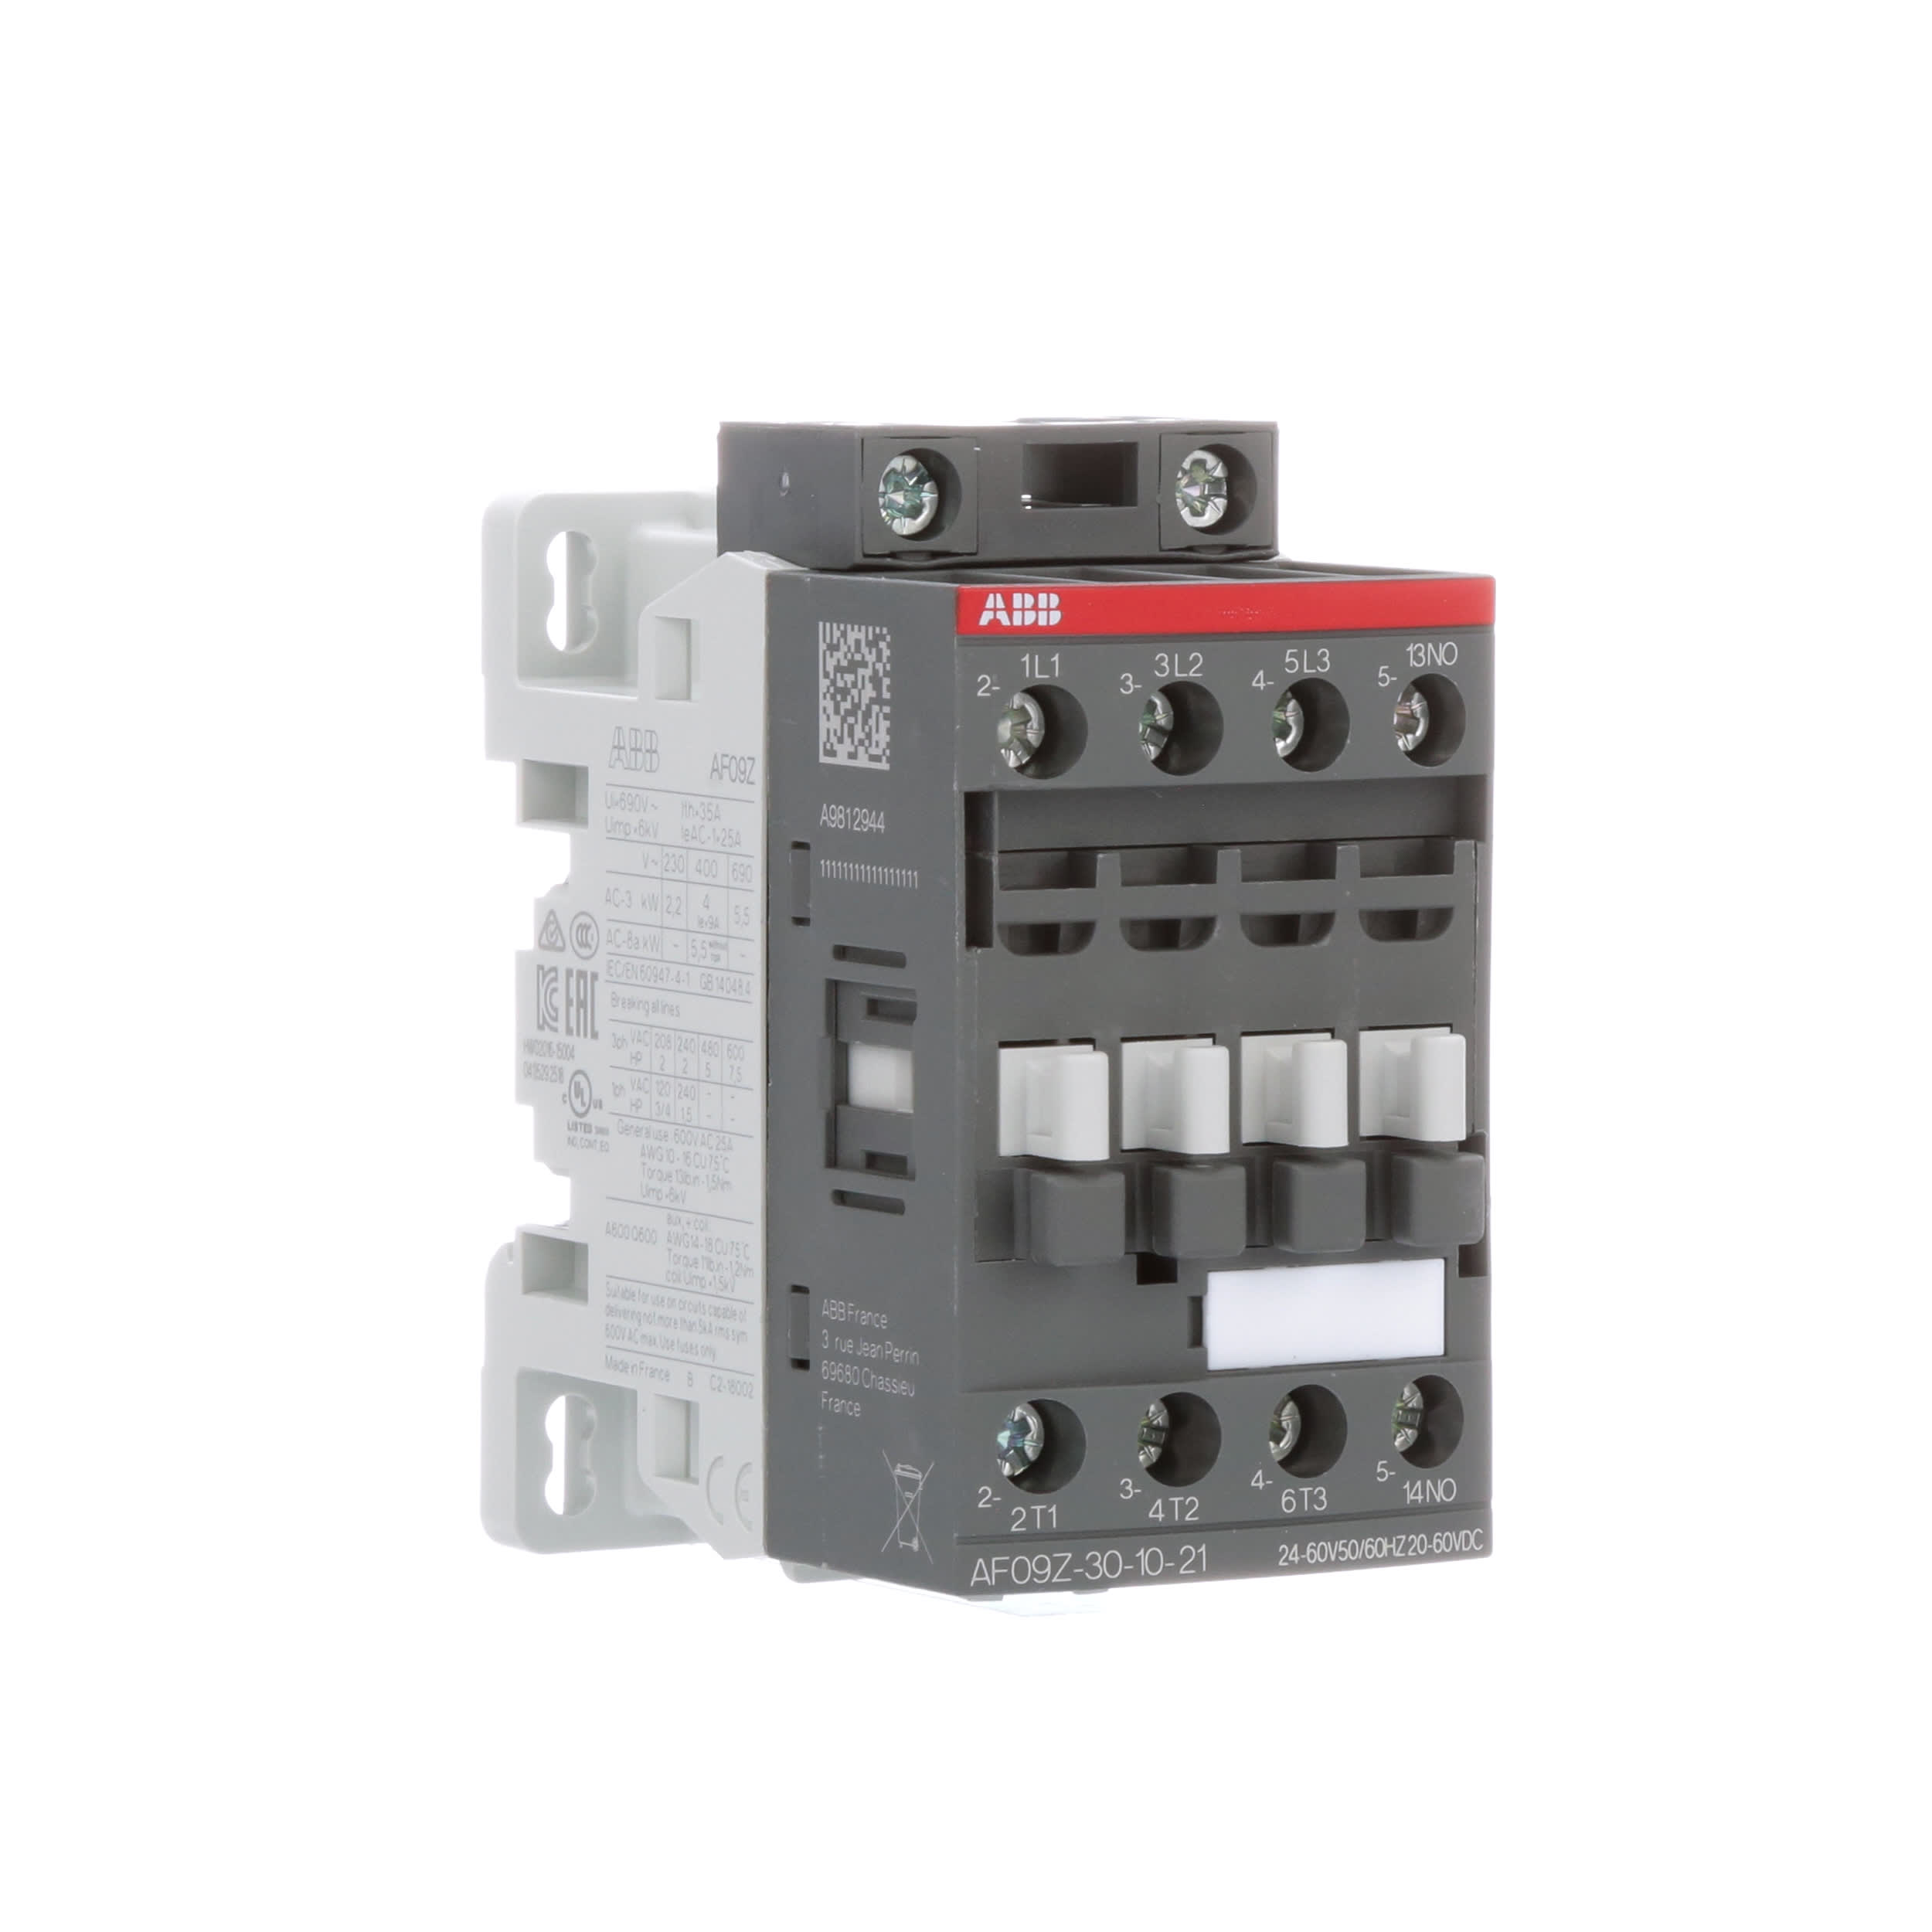 ABB - AF09Z-30-10-21 - Contactor, 3 Pole, 400V, 9.0 A, 24 to 60